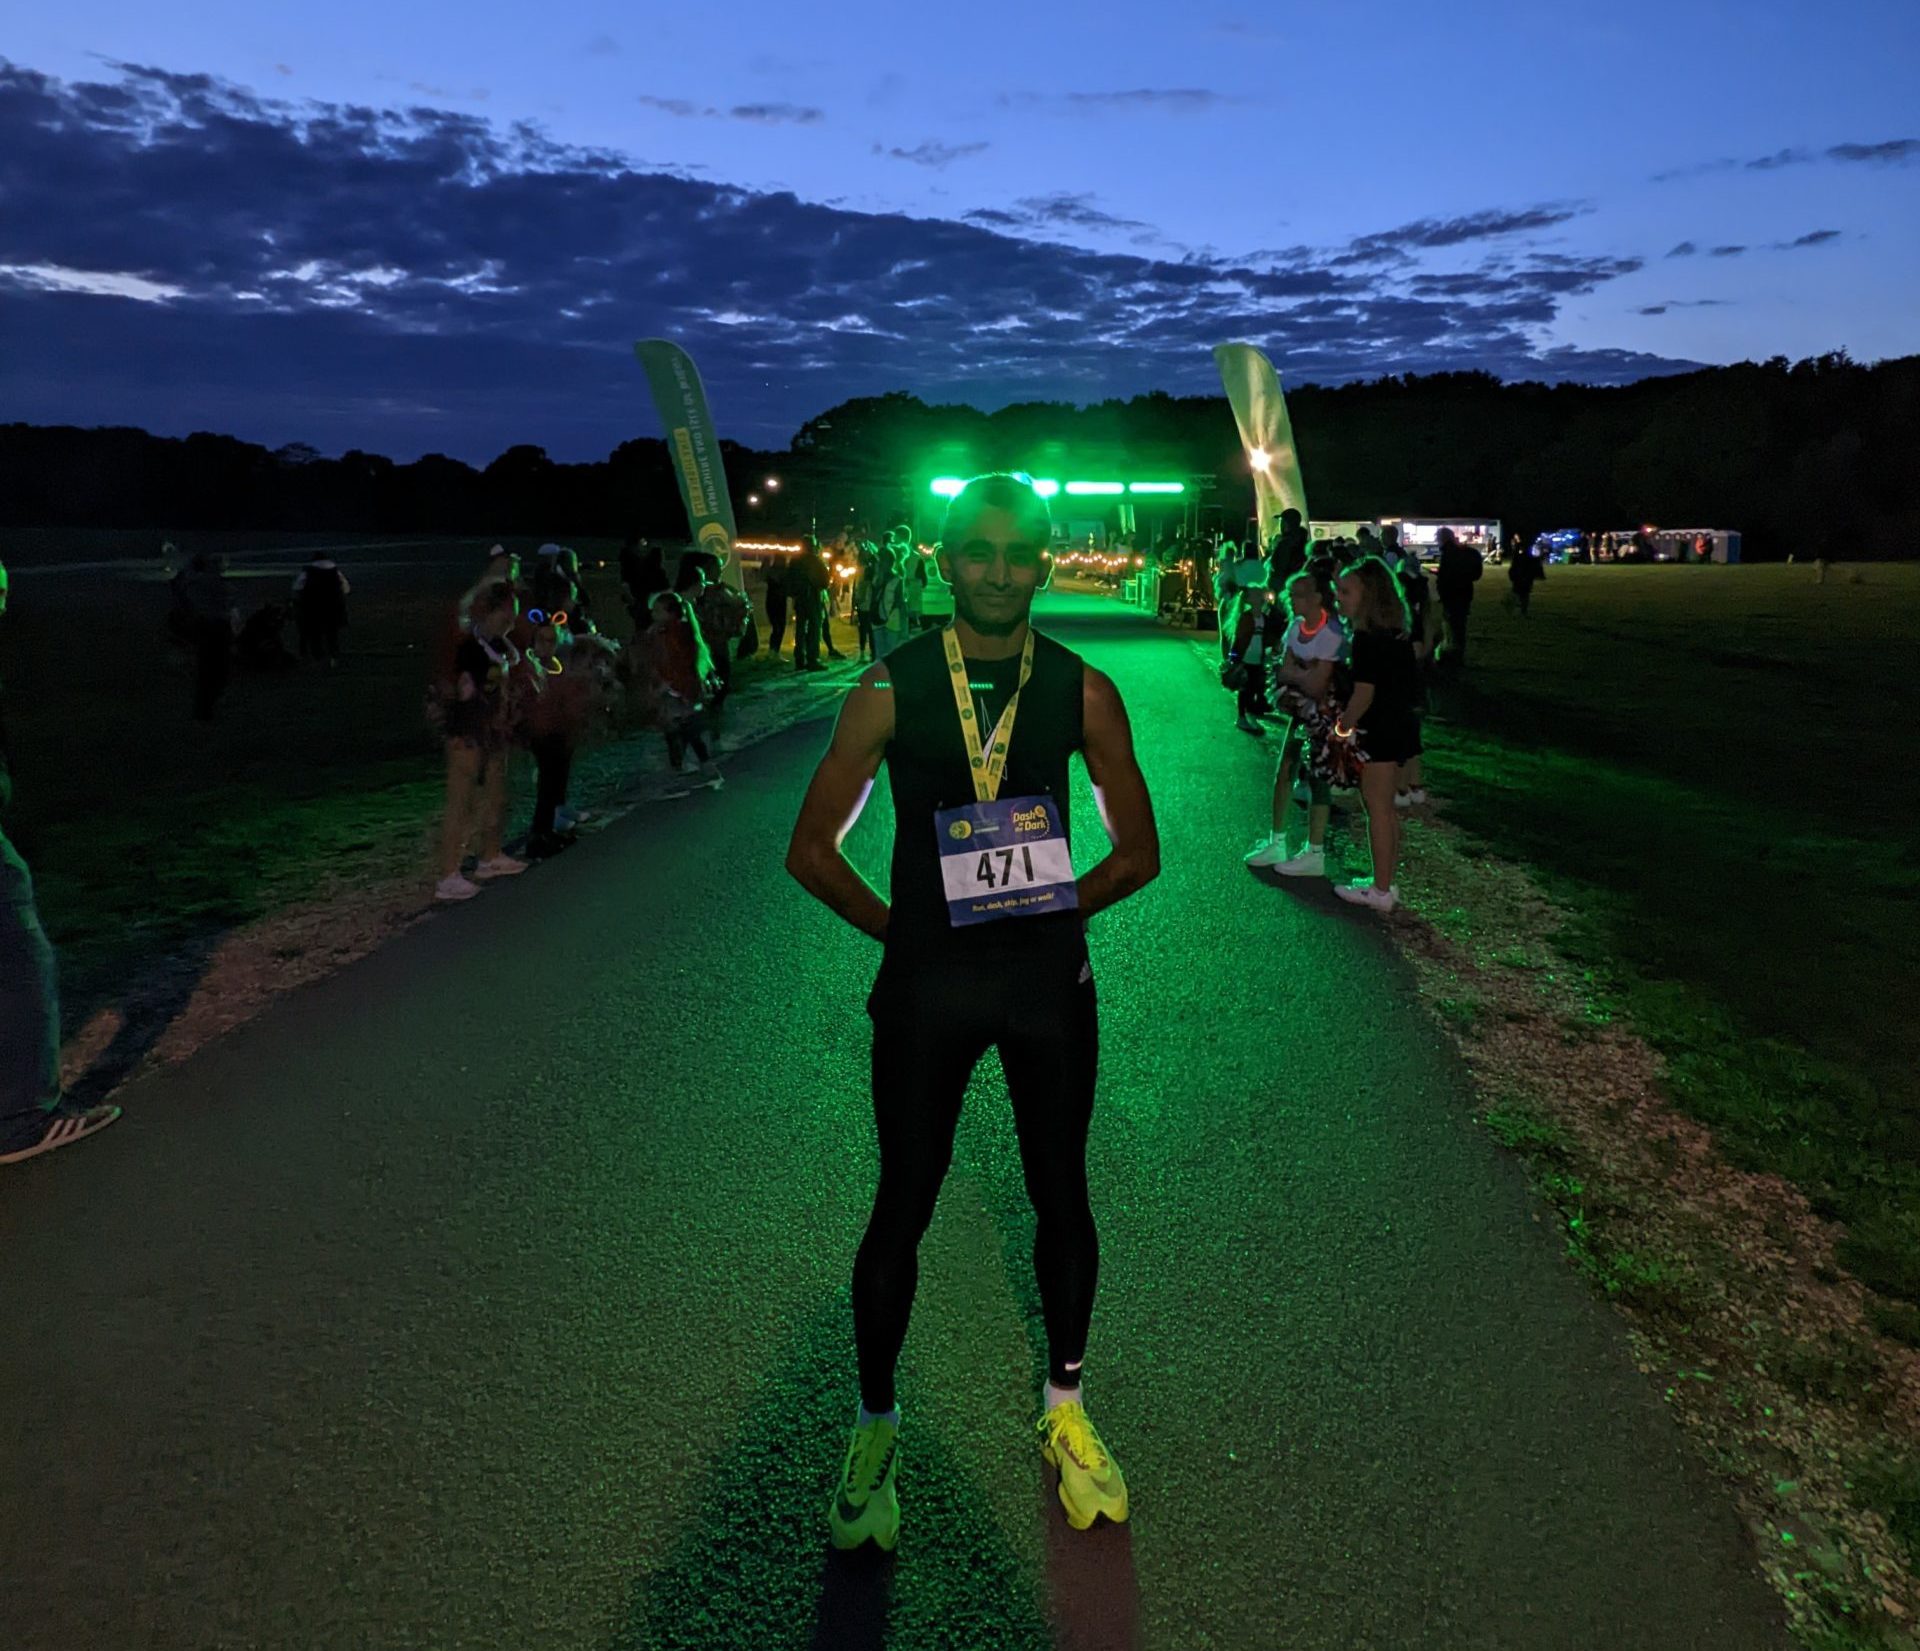 A man stood at the finish line of a race with green lights in the background